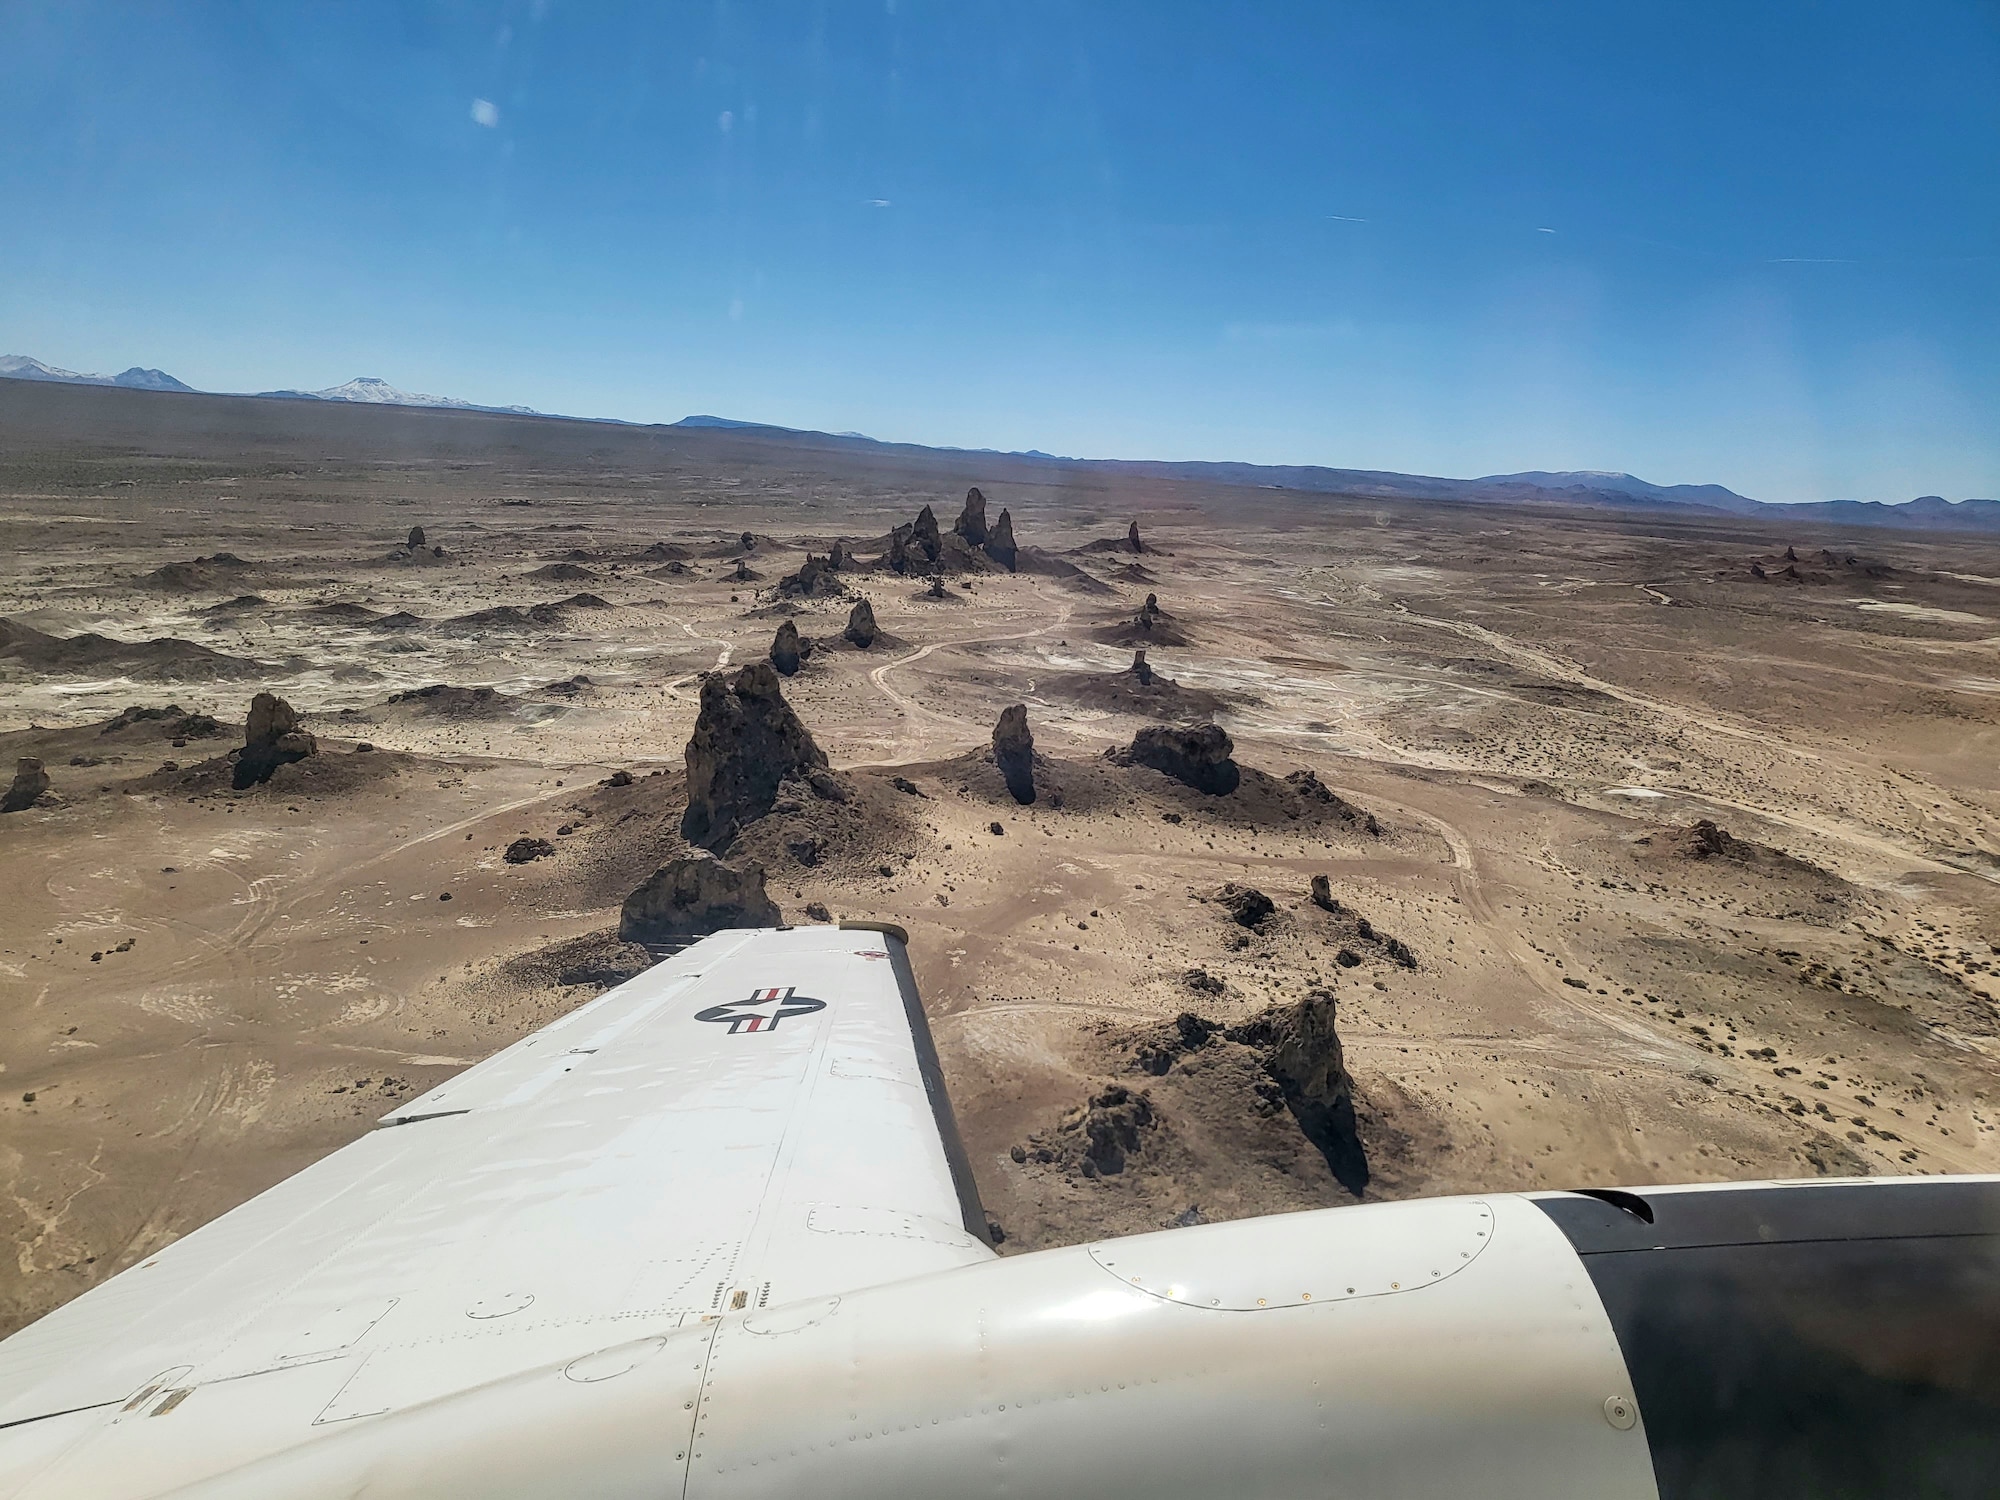 Trona Pinnacles, a geological feature in the California Desert National Conservation Area, can be seen during the Sidewinder low level flight survey through the Southern California wilderness.